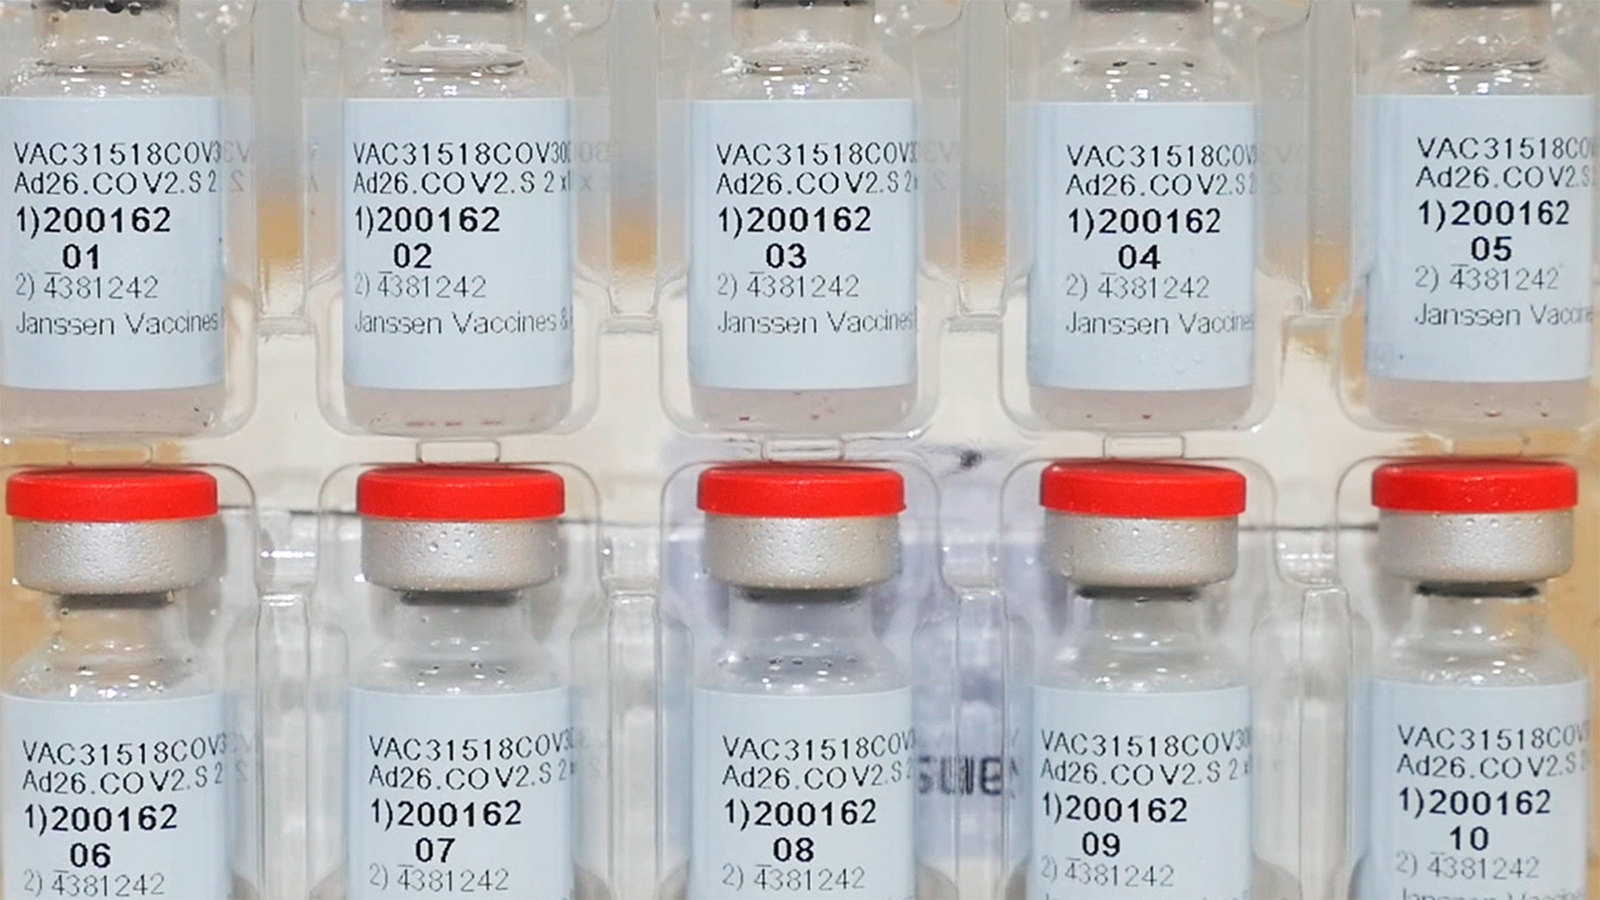 In this file photo, Johnson & Johnson vials of the Janssen Covid-19 vaccine are seen in the United States, on December 2, 2020.